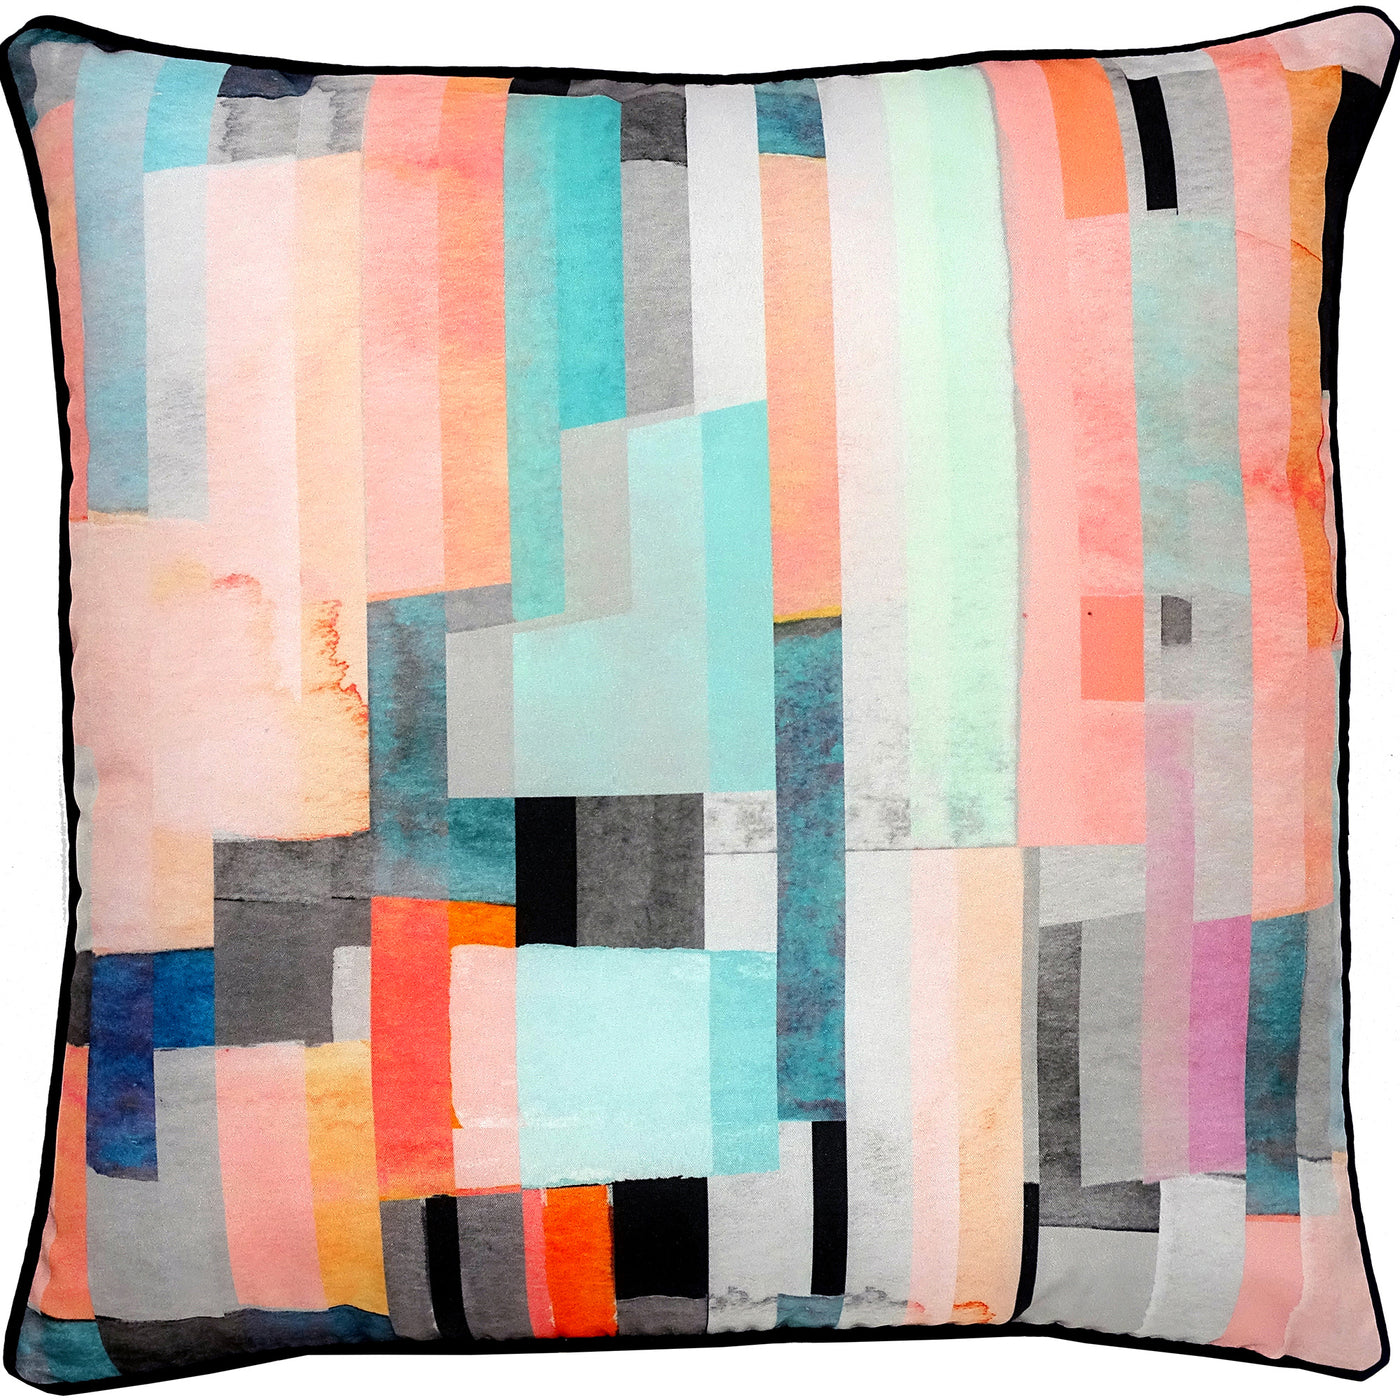 Renwil Olivera Pillow